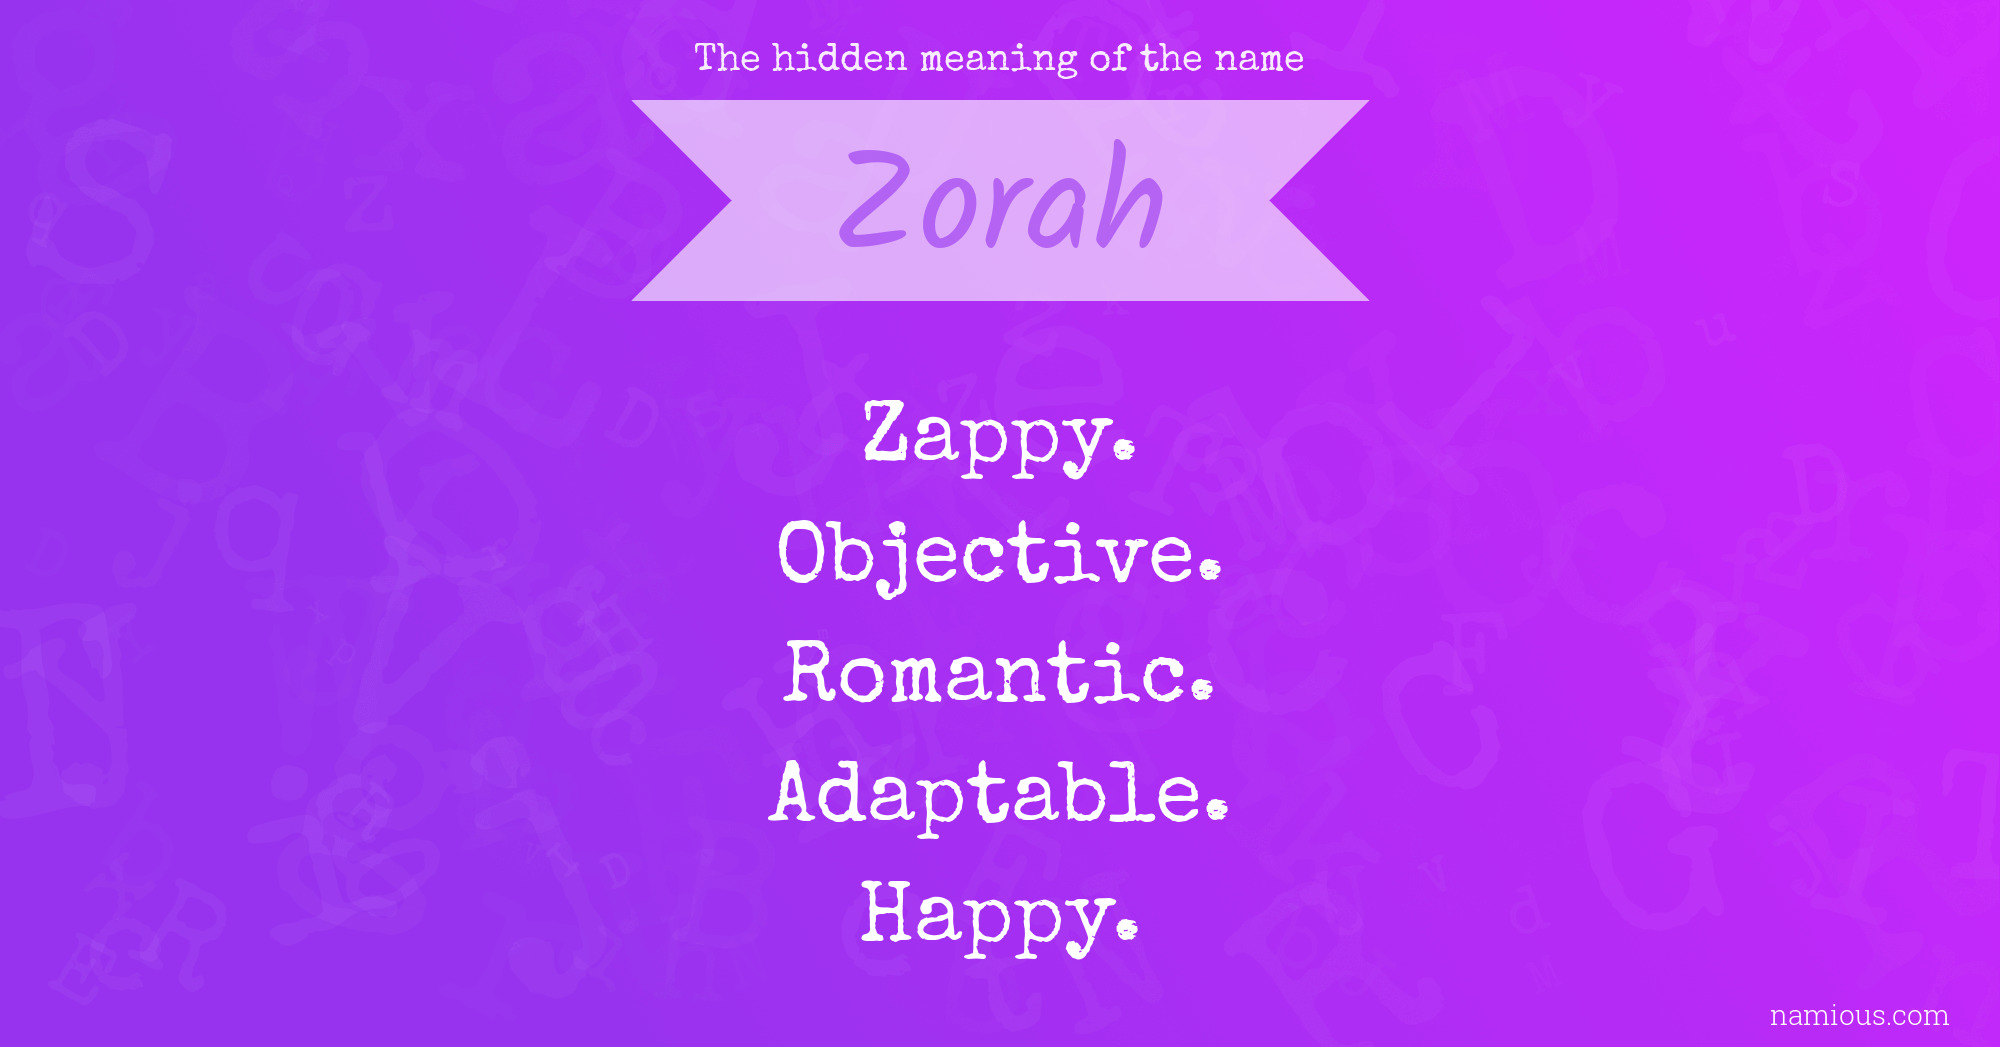 The hidden meaning of the name Zorah